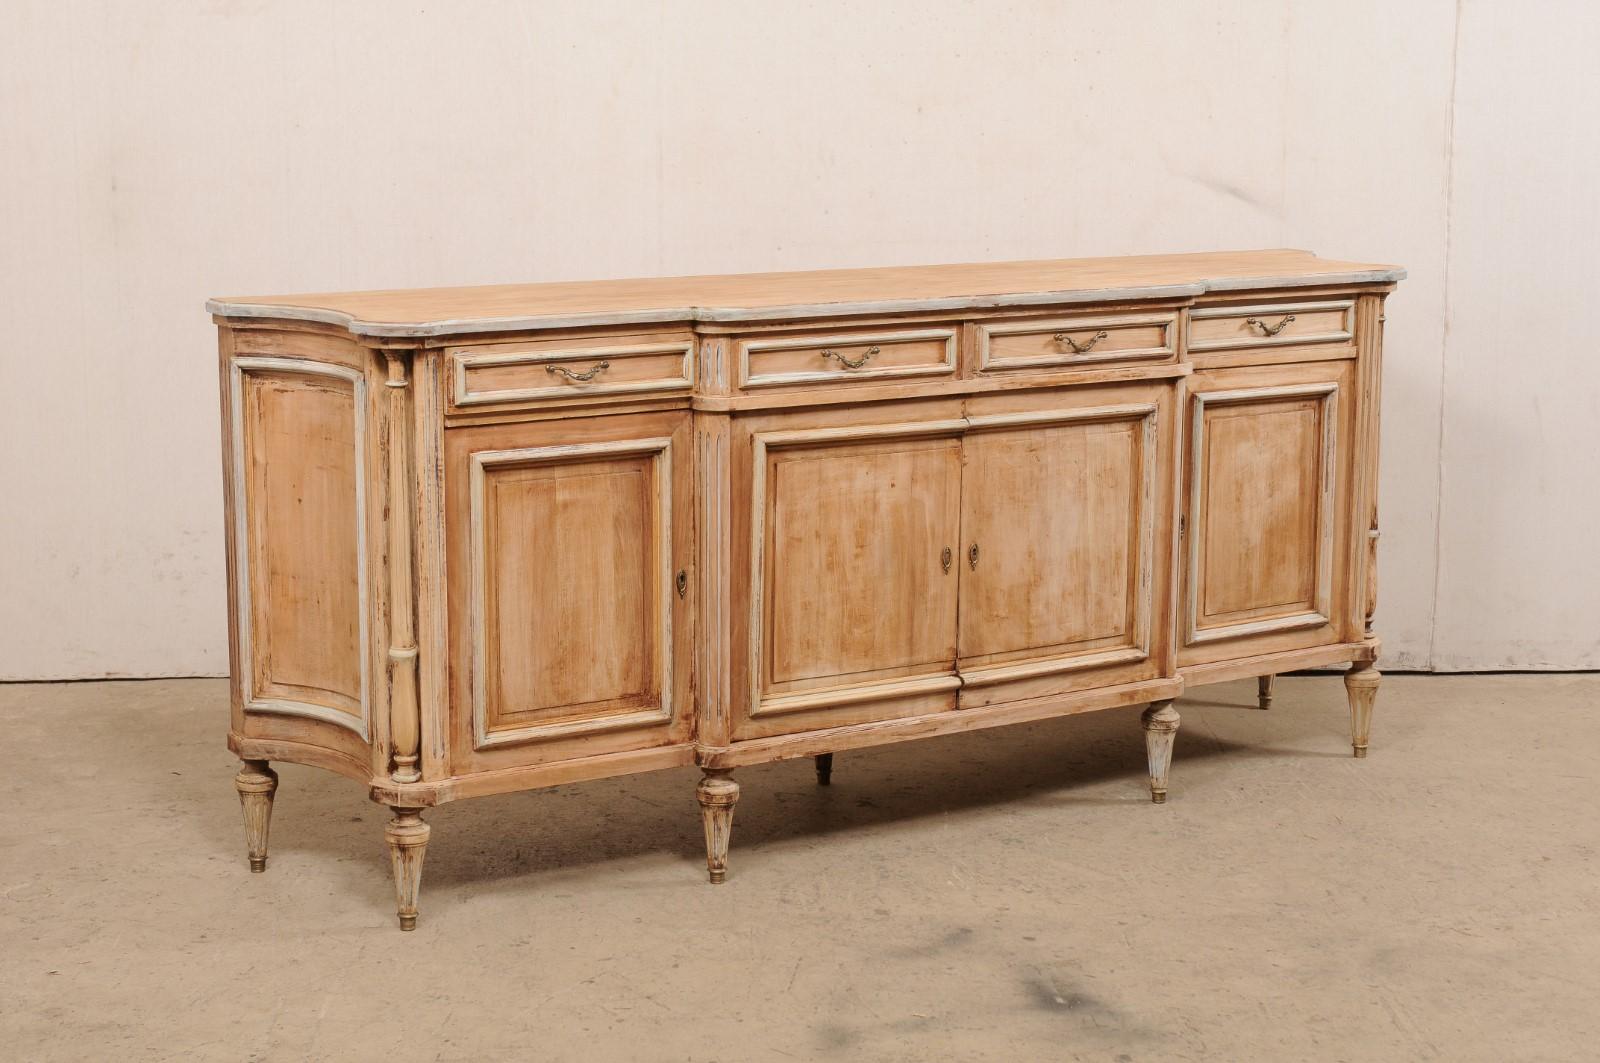 A French carved wood sideboard, with column accents and bleached finish, from the mid 20th century. This mid-century buffet console from France has a curvaceous form with subtle break-front and concave appearance at sides. Four panel-front drawers